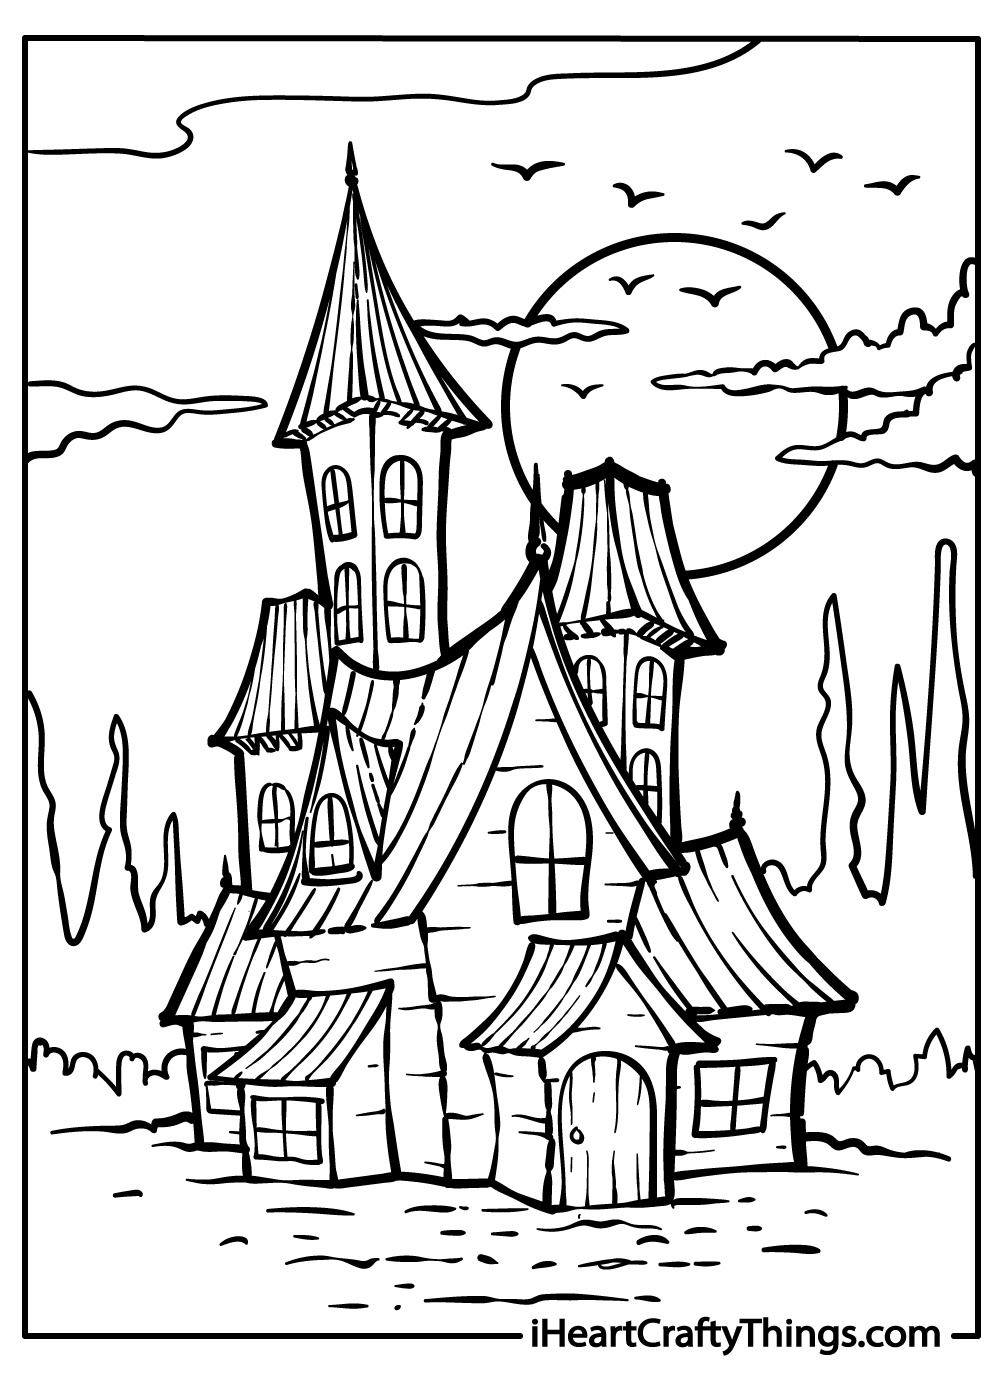 haunted house coloring sheet